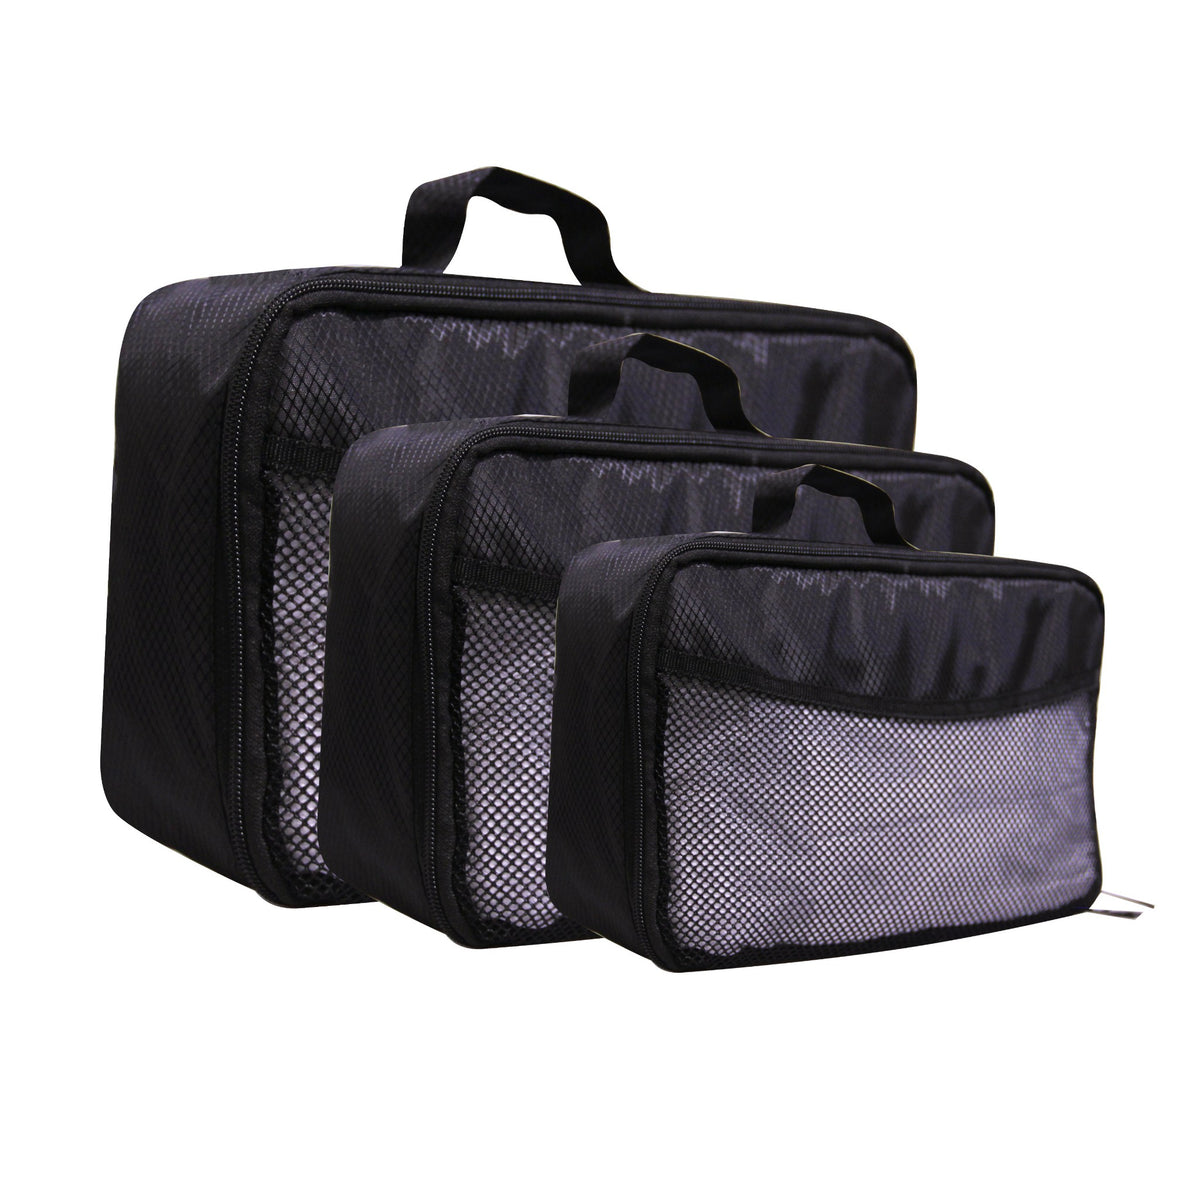 Travel Packing Cubes Mesh Lightweight Bags For Luggage - PACK OF 3 S/M/L, 6 Colors